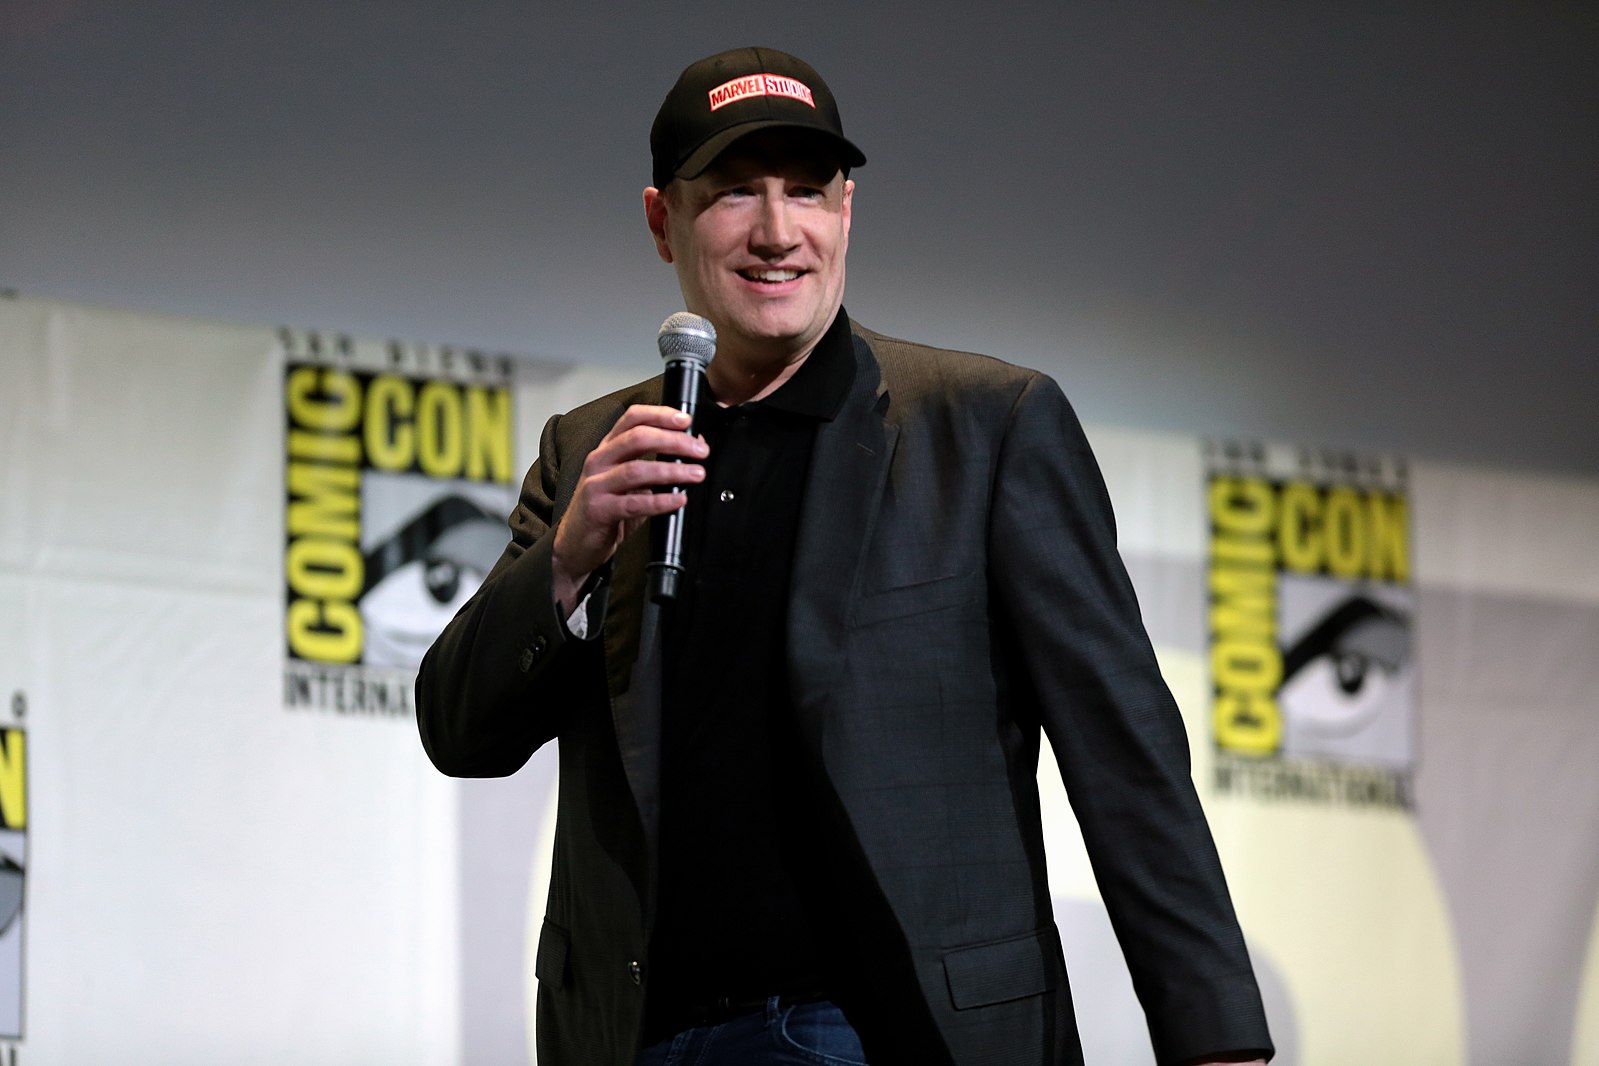 Kevin Feige’s Star Wars Film Gets A Writer